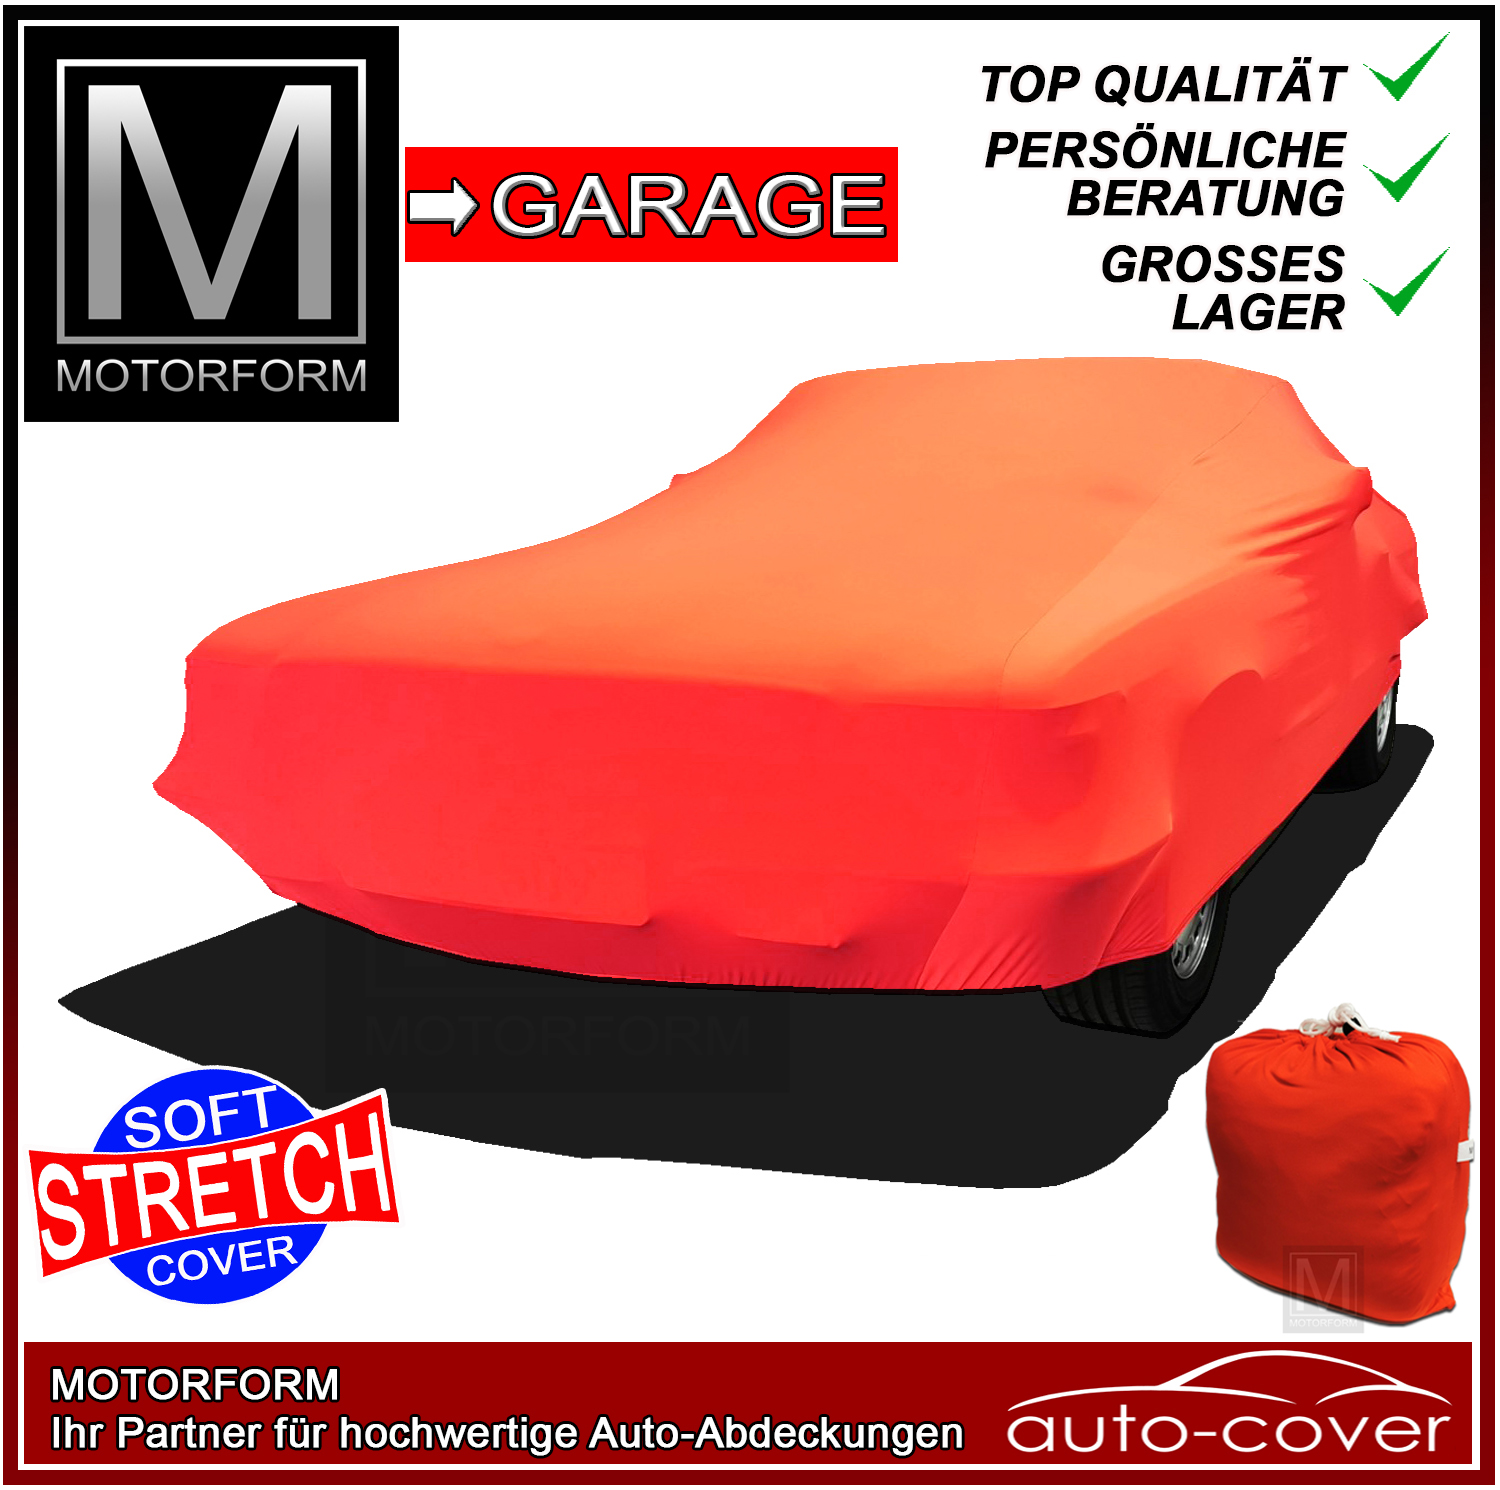 Super Stretchy Cover for Audi A8 / S8 (2003-10) SWB